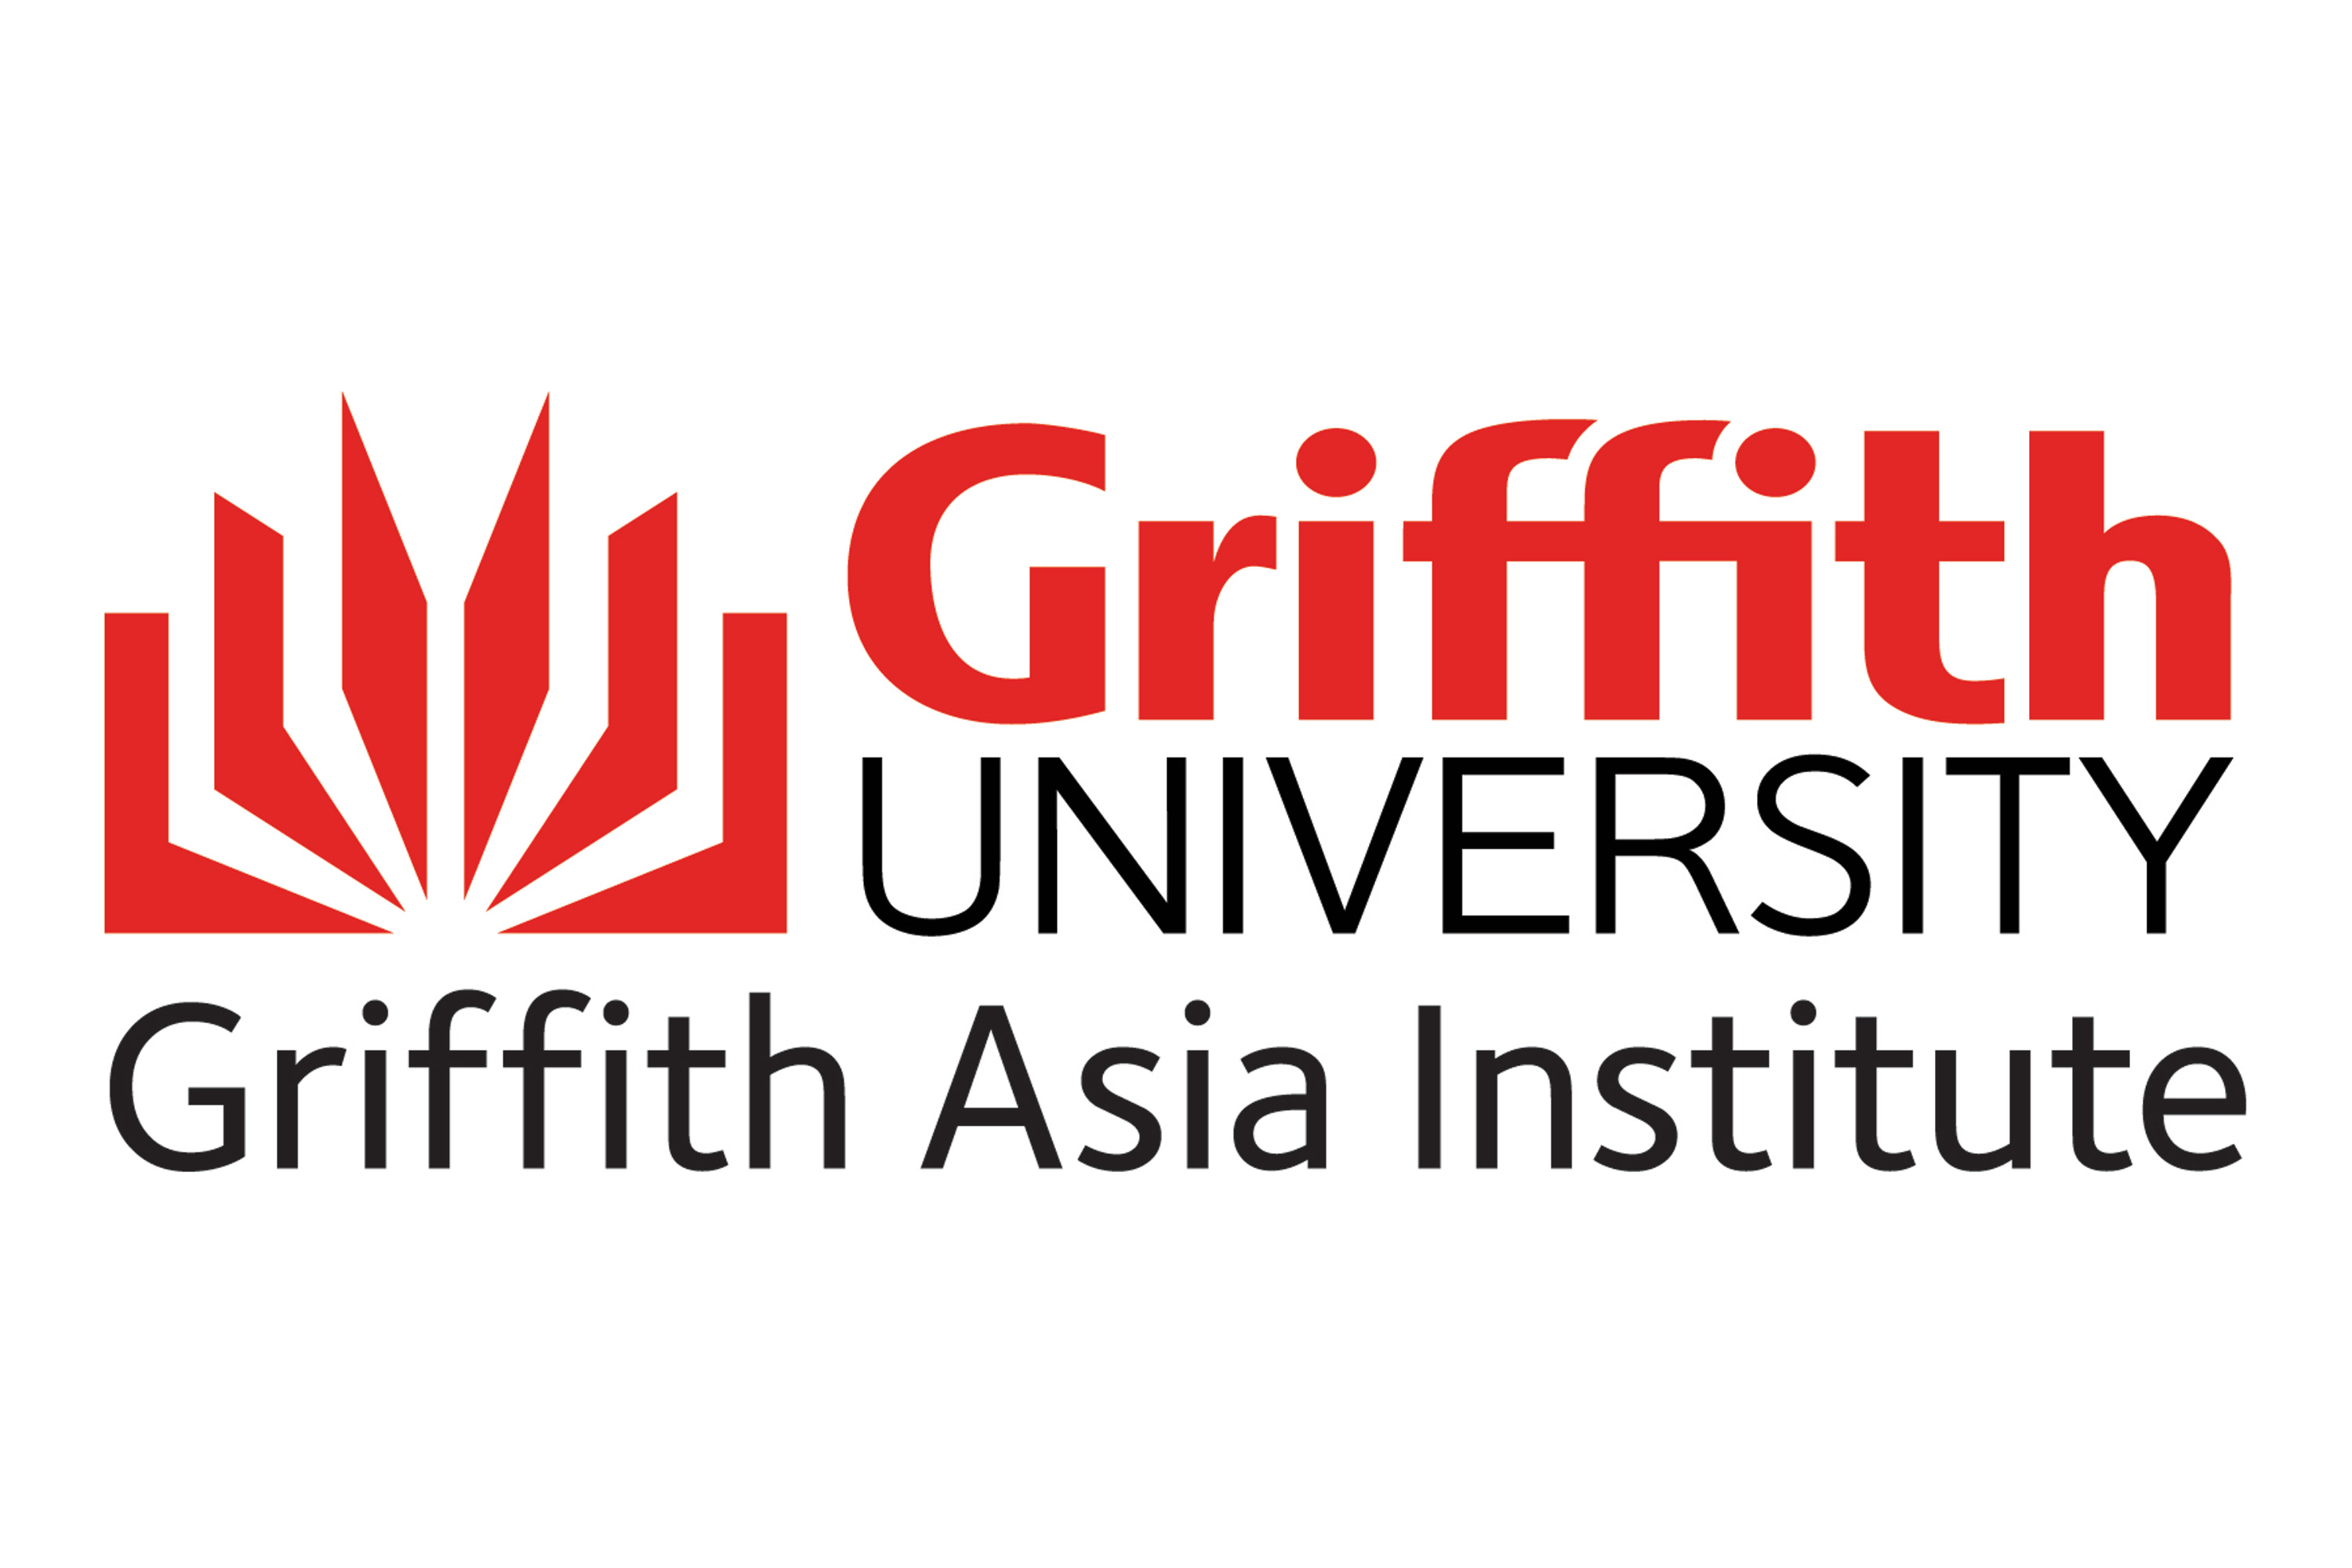 Griffith Asia Institute Research Seminar: Is this our best course to steer?: A Rules-based Order weighs anchor in the South China Sea